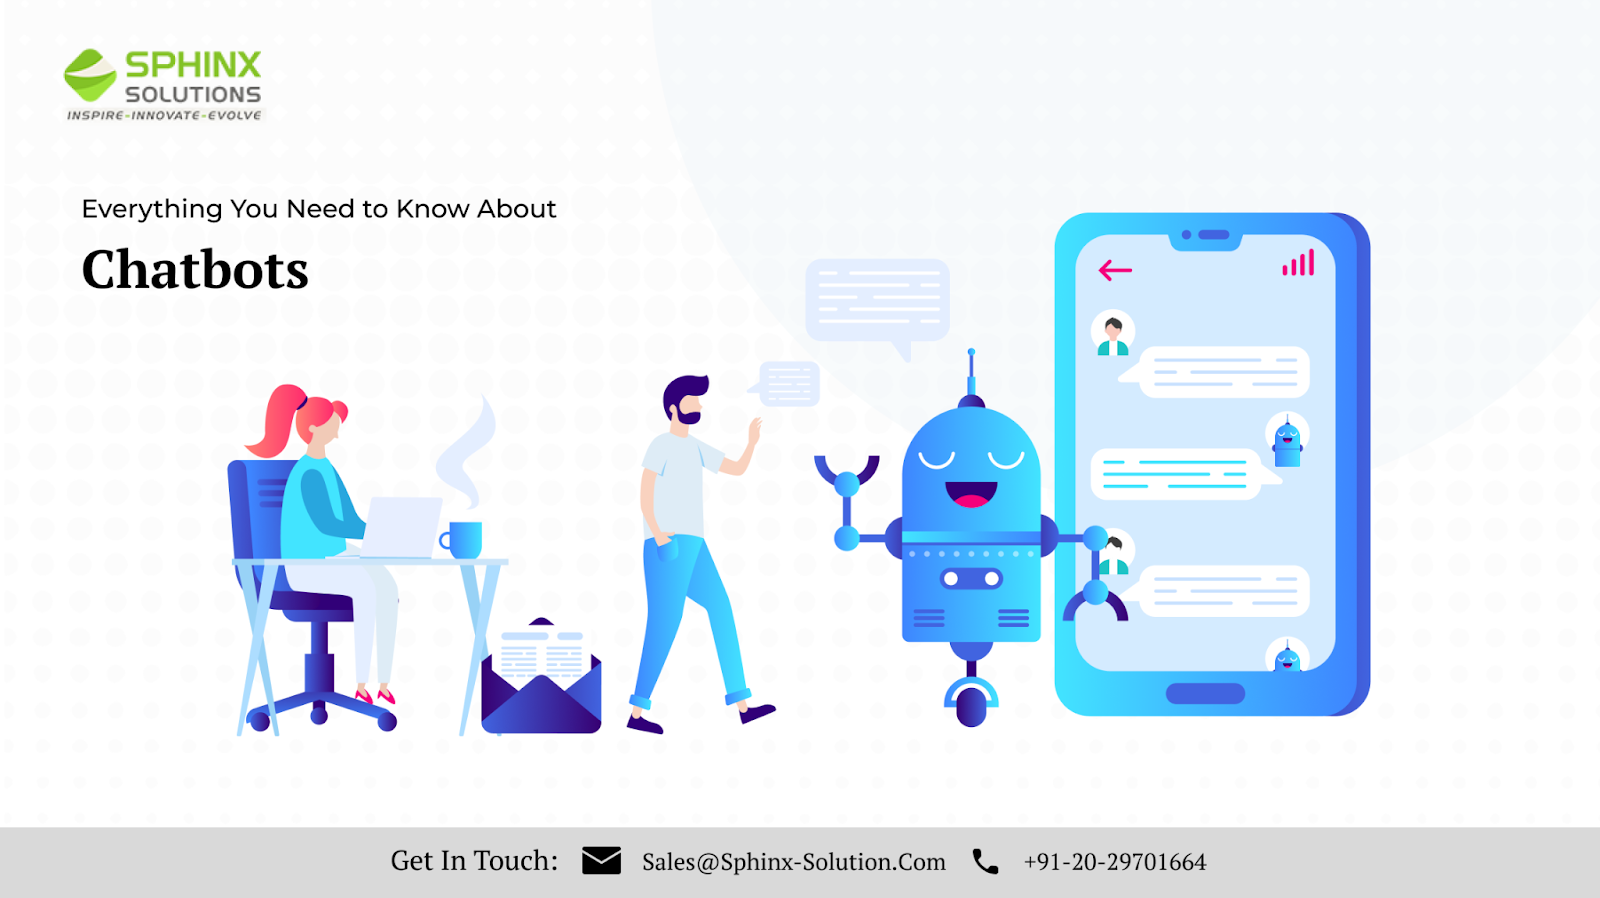 SPHINX

SOLUTIONS

INGPIRE- INNOVATE - EVOLVE

Everything You Need to Know About

Chatbots

 

Get In Touch: NE Sales@Sphinx-Solution.Com Rg +91-20-29701664